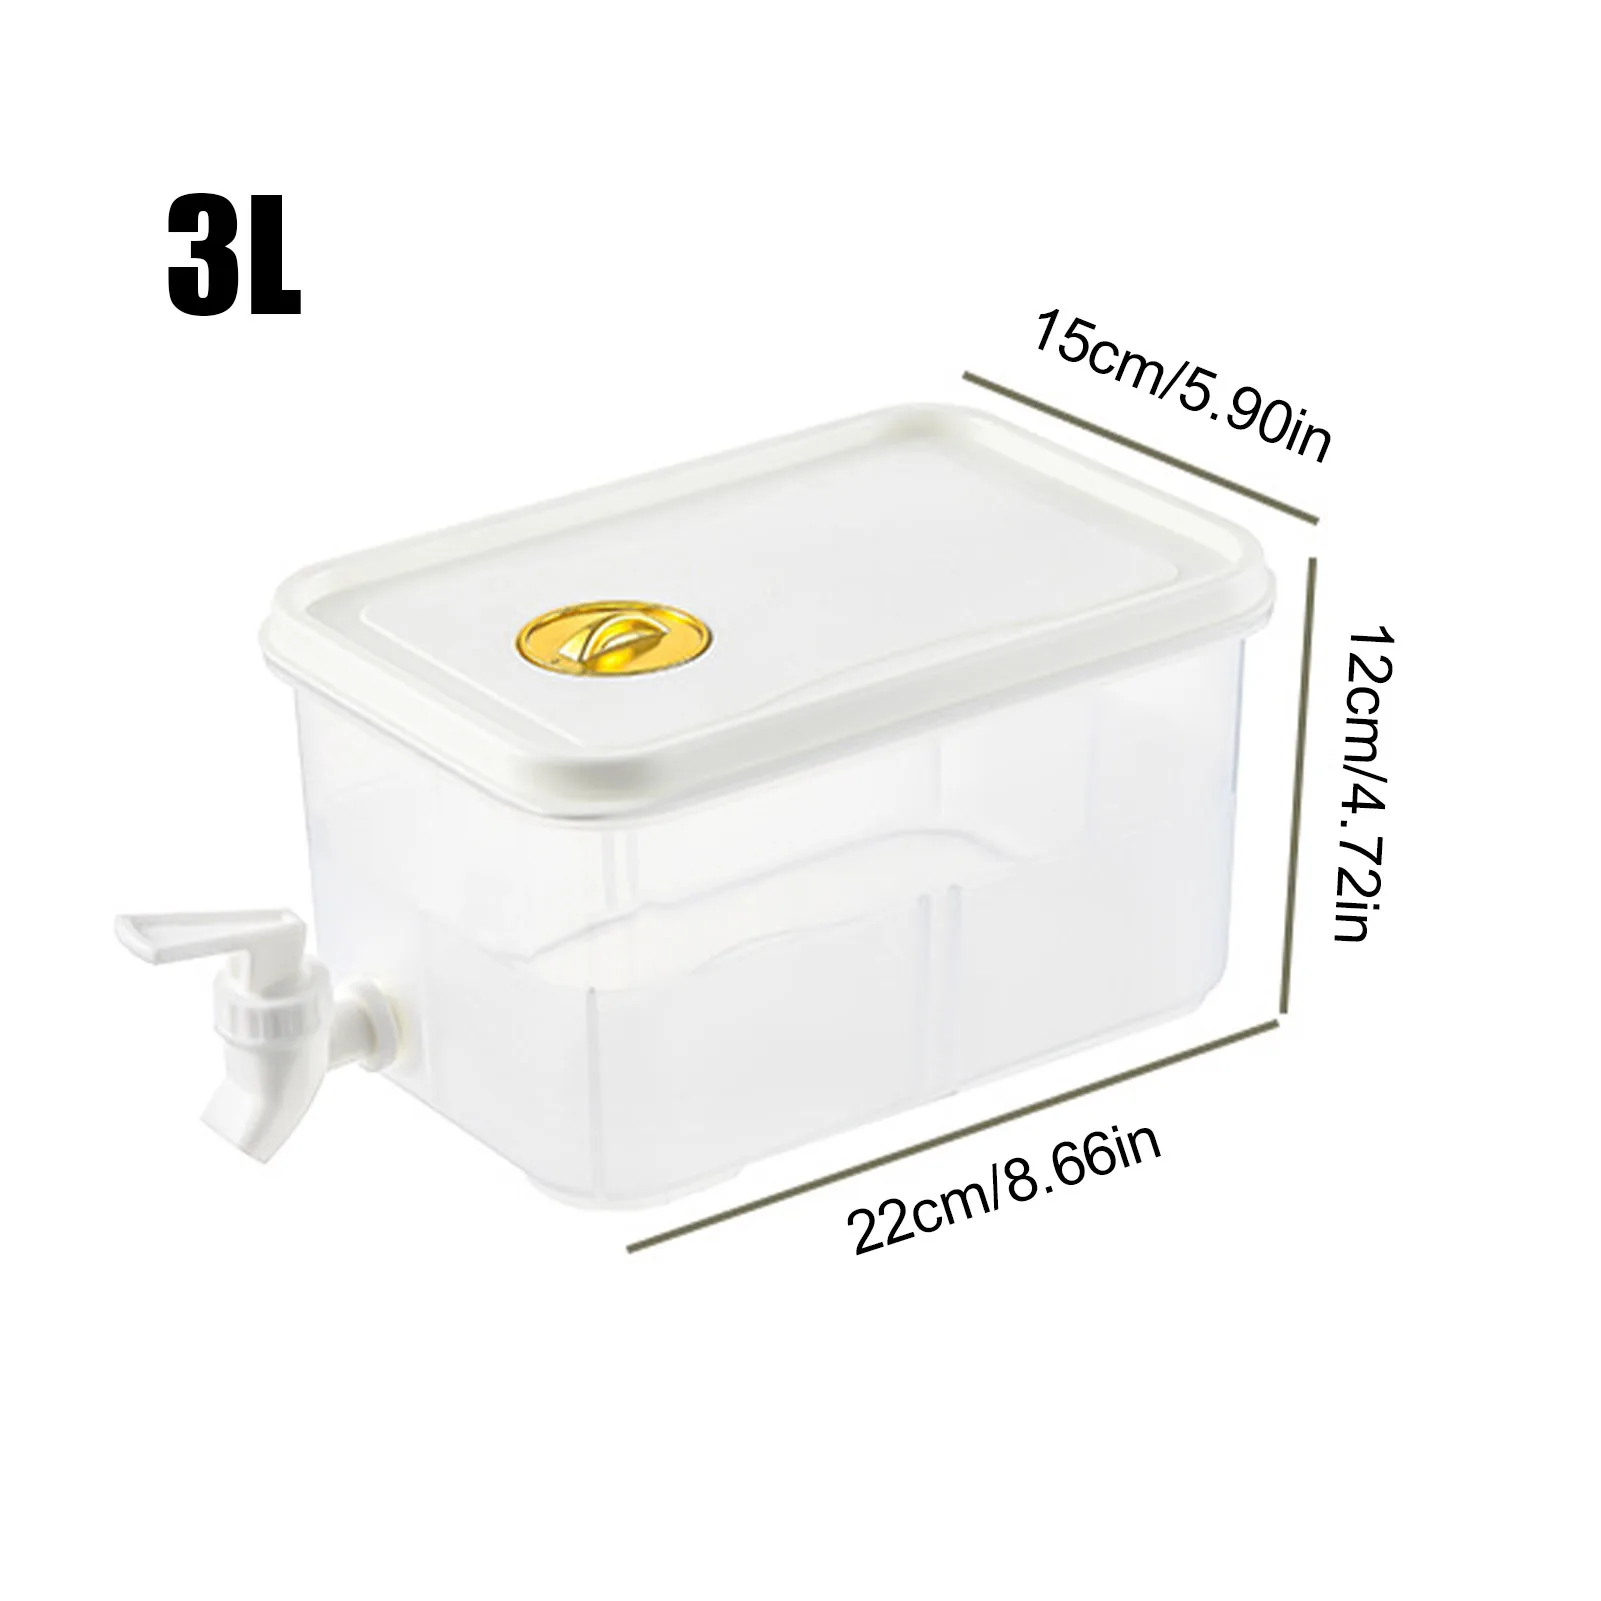 https://ae01.alicdn.com/kf/Safa4e9be062646fda40e9038c3daf444Z/Cold-Kettle-With-Faucet-Fridge-Drink-Dispenser-Iced-Lemonade-Juice-Containers-For-Parties-3L-5L-Water.jpg